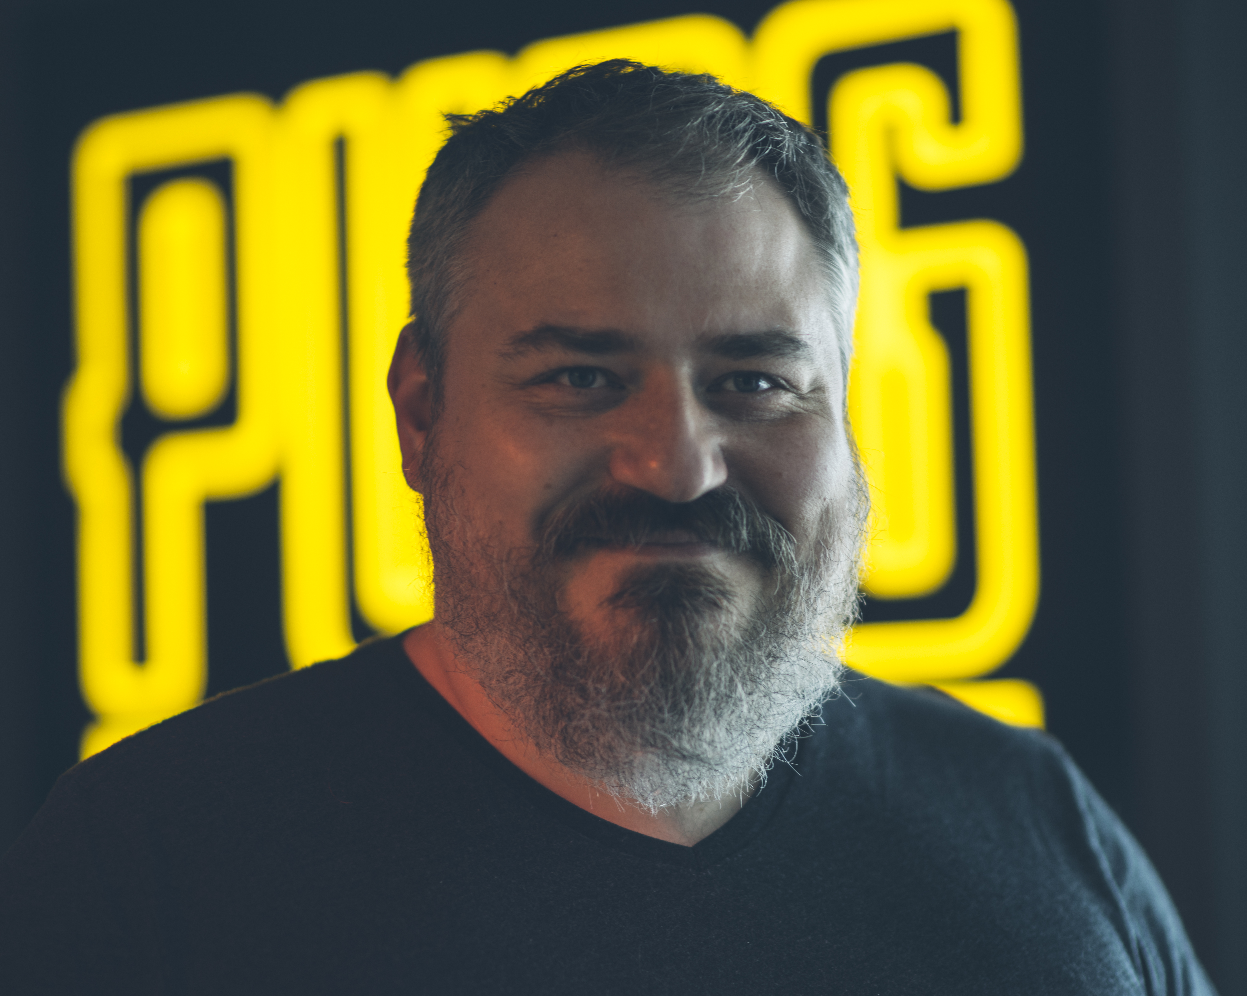 Image for Dave Curd takes over from Brendan Greene as PUBG creative director